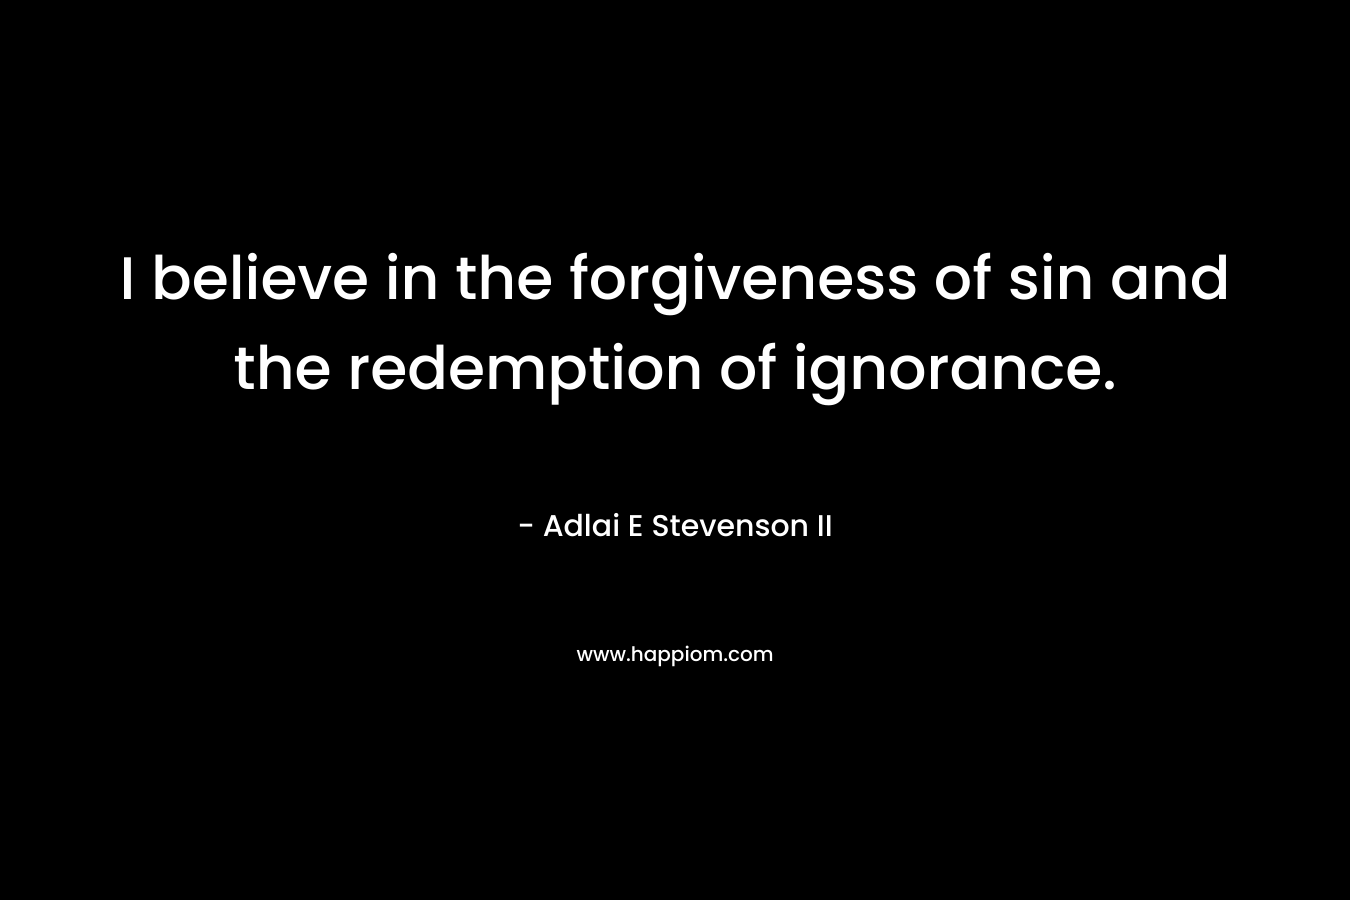 I believe in the forgiveness of sin and the redemption of ignorance.